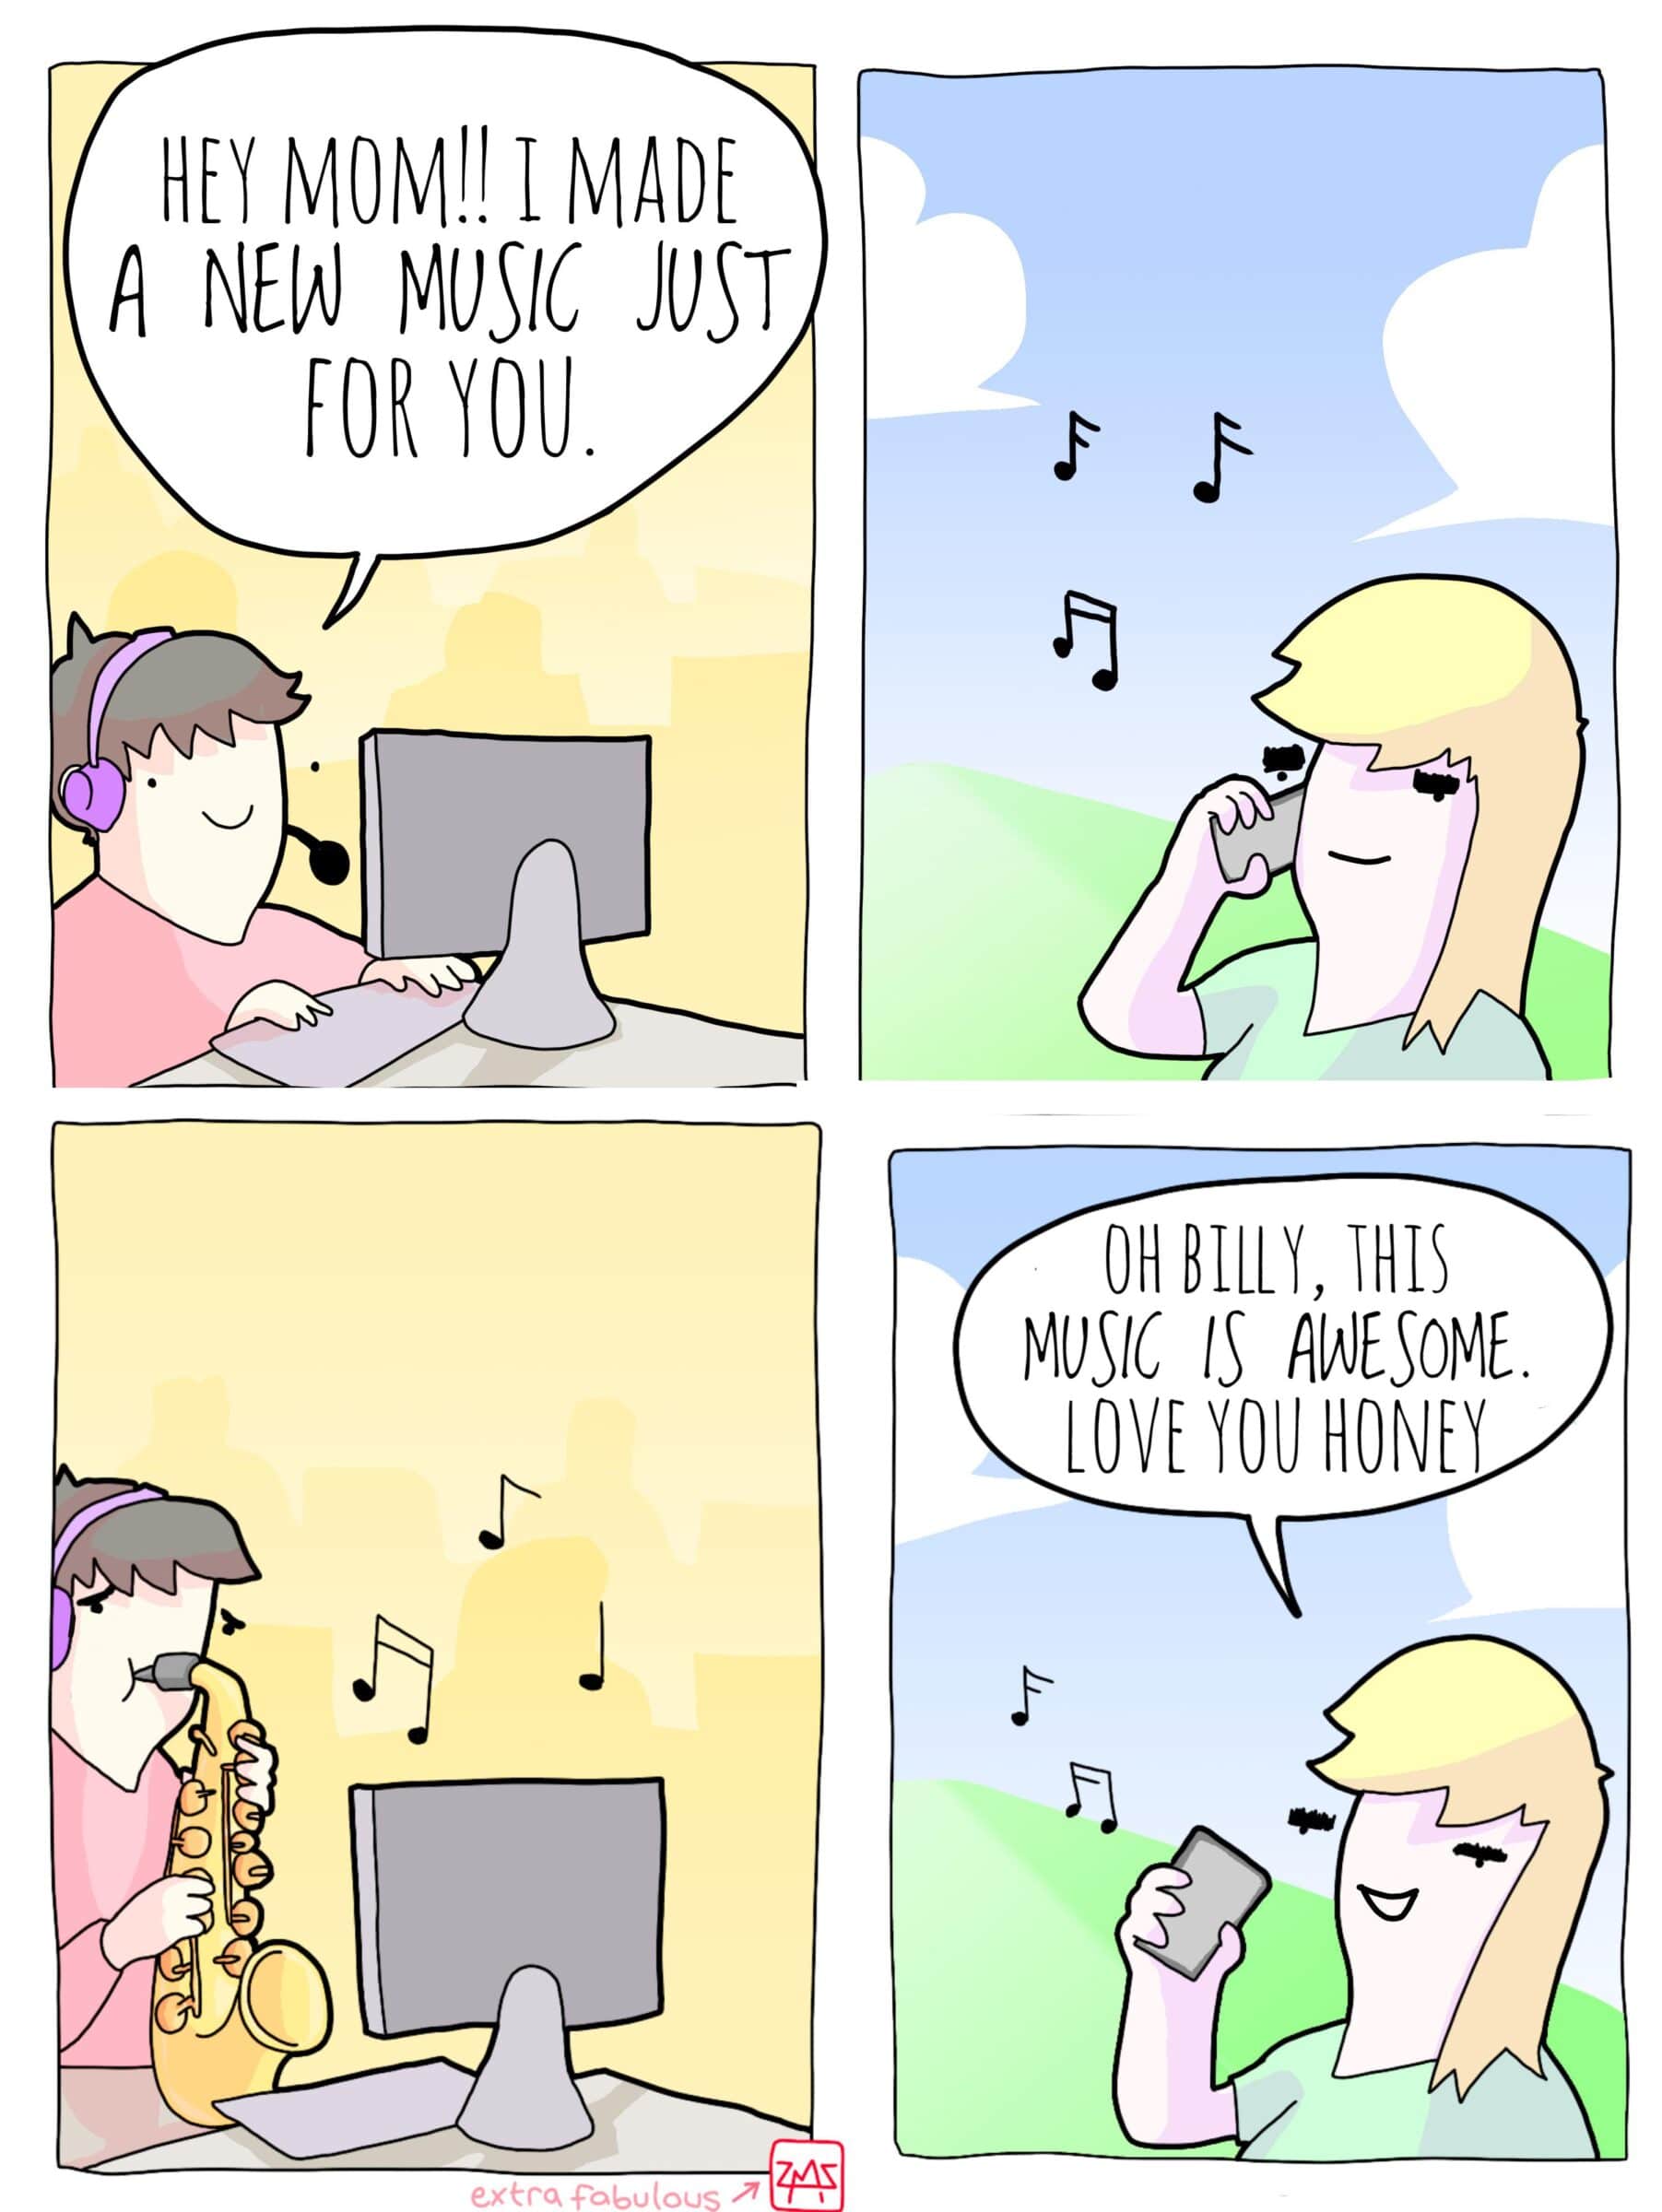 Wholesome memes, Extra Fabulous, IbRujko Wholesome Memes Wholesome memes, Extra Fabulous, IbRujko text: HEY MOMM I MADE A NEW MUSIC JUST FOR YOU. ZAs OH Bill], THIS MUSIC IS AWESOME. YOU HONEY 51 